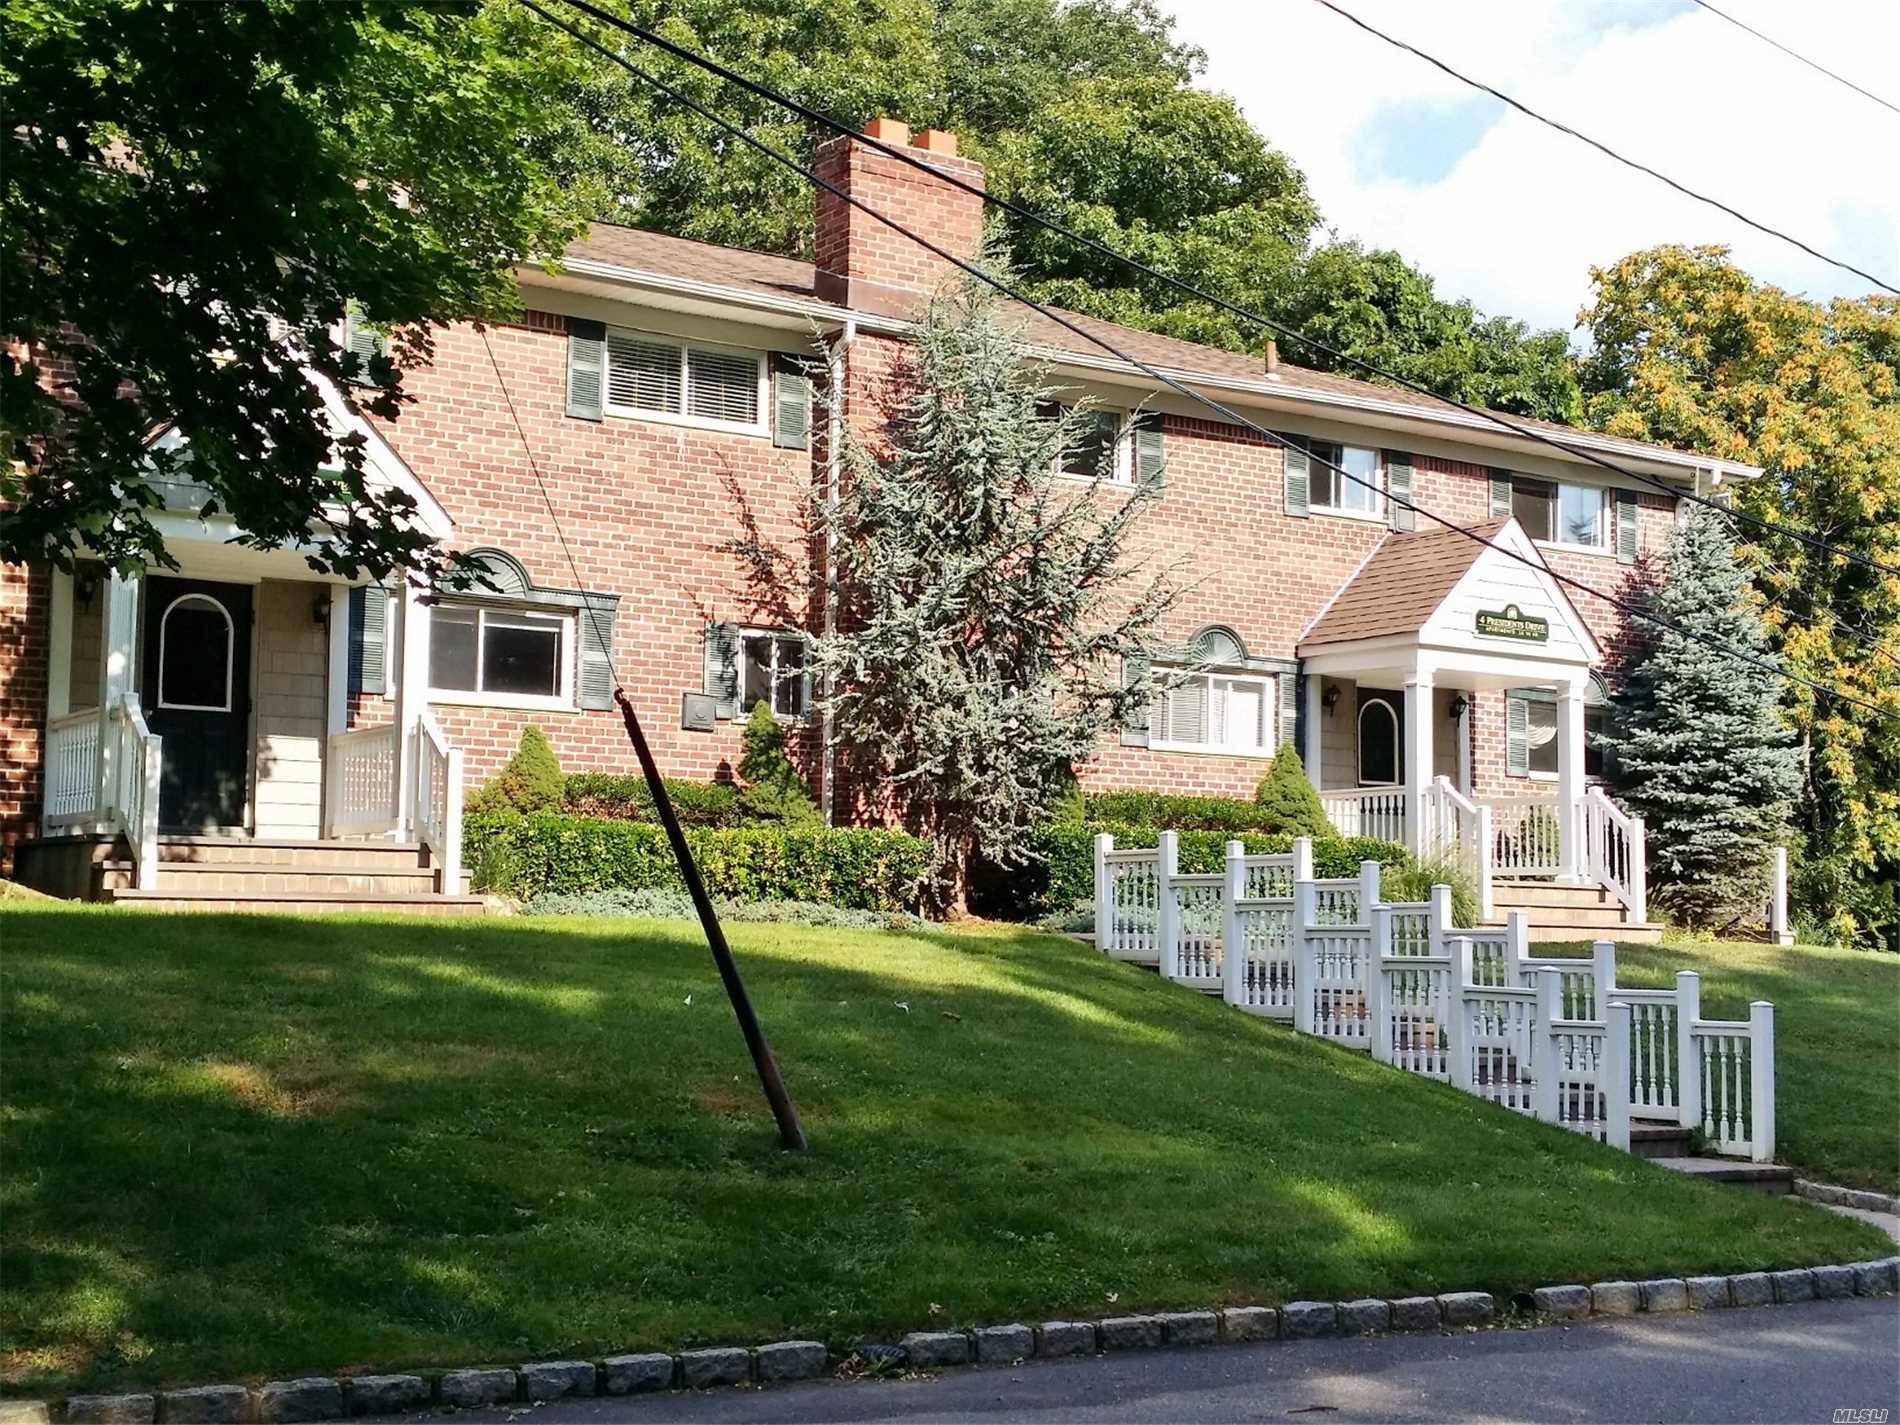 Located Upon A Hilltop W/A Waterfall Entrance This Serene Location Is In Perfect Reach To The Port Jefferson Harbor Village.